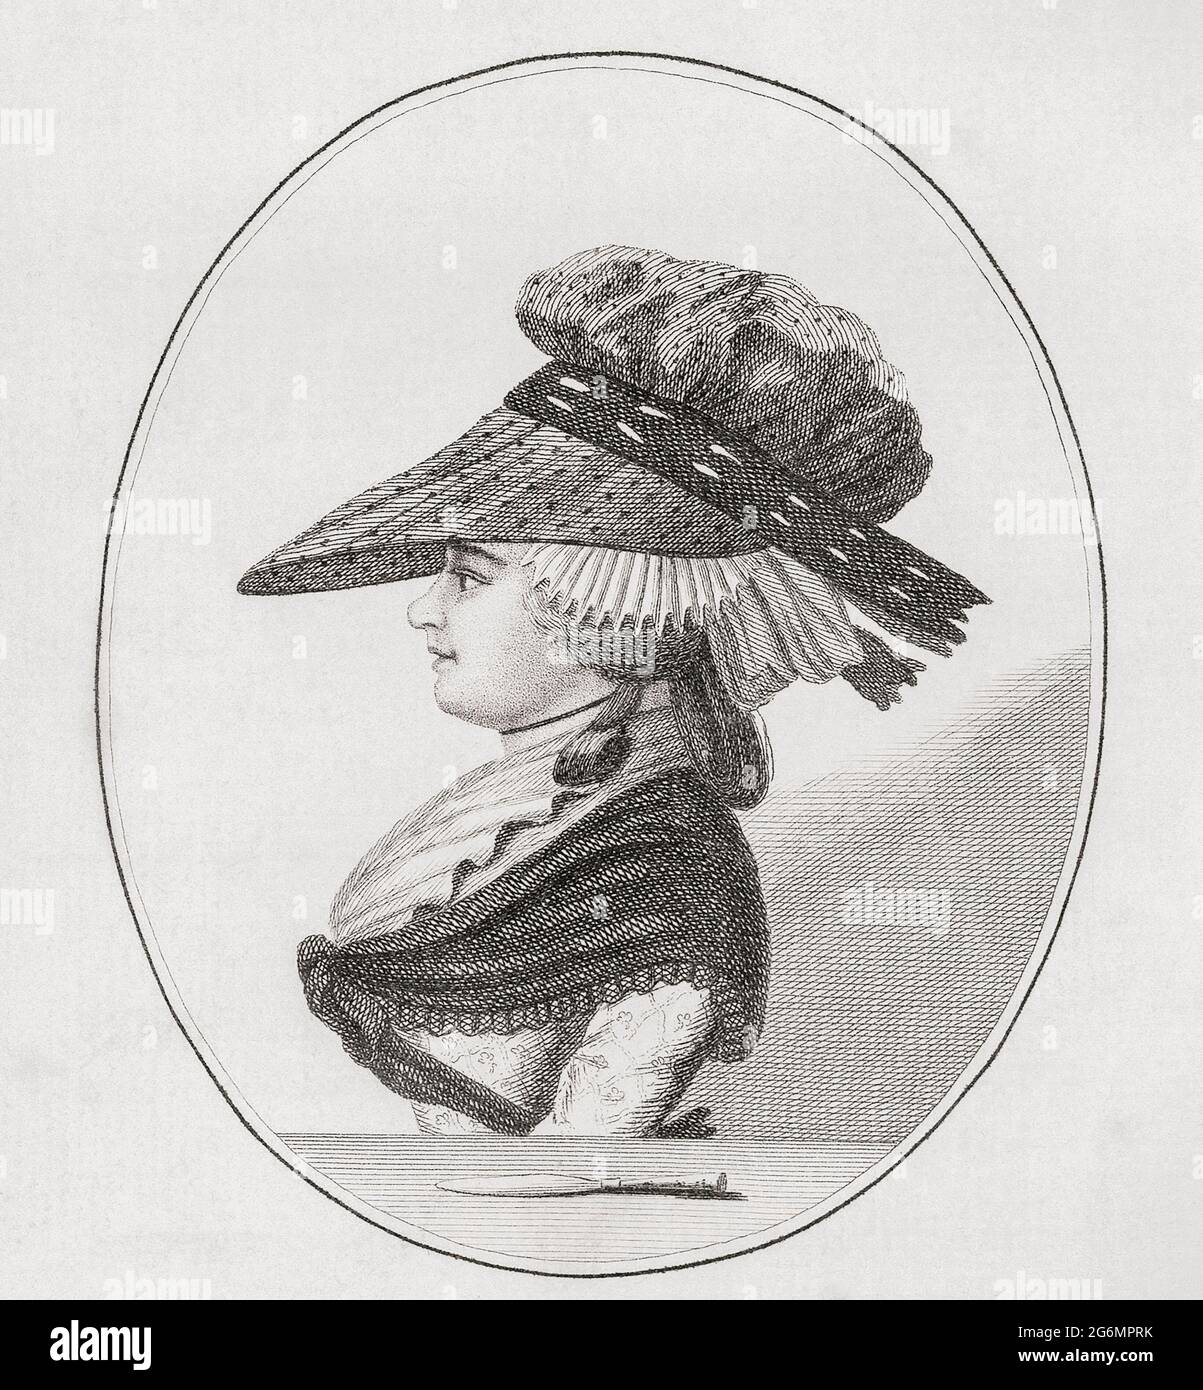 Margaret Nicholson, c. 1750 – 1828.  Englishwoman who attempted to assassinate King George III with a dessert knife in 1786.  The King was uninjured.  Nicholson apparently considered herself heir to the throne.  She was certified insane and committed to Bethlem Royal Hospital where she died 42 years later.  After a contemporary print by an unknown artist. Stock Photo